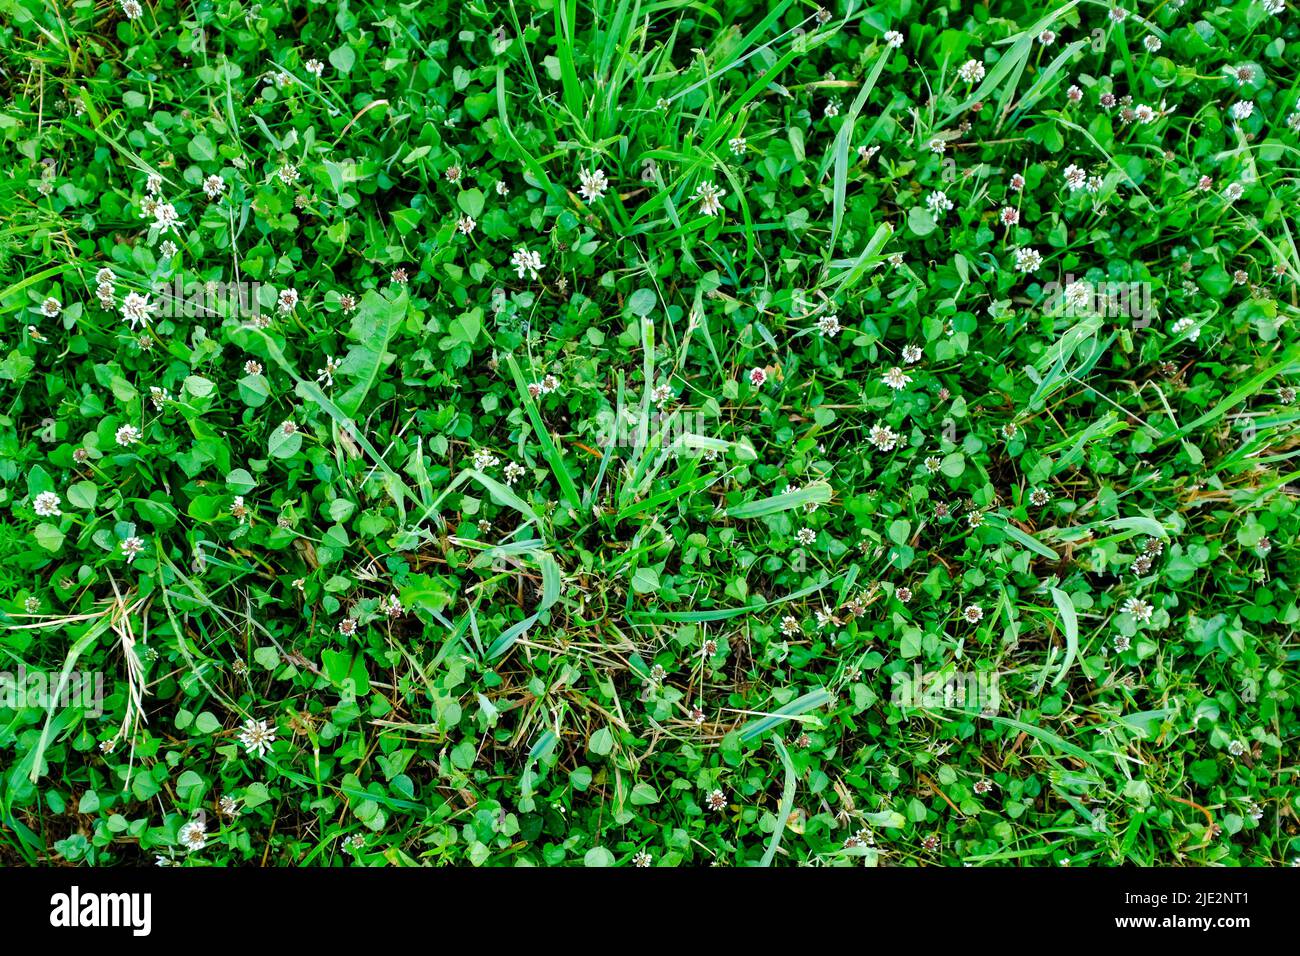 Green meadow, top view. Natural grass field background for design or project. Summer meadowland texture. Floral landscape for publication, poster Stock Photo